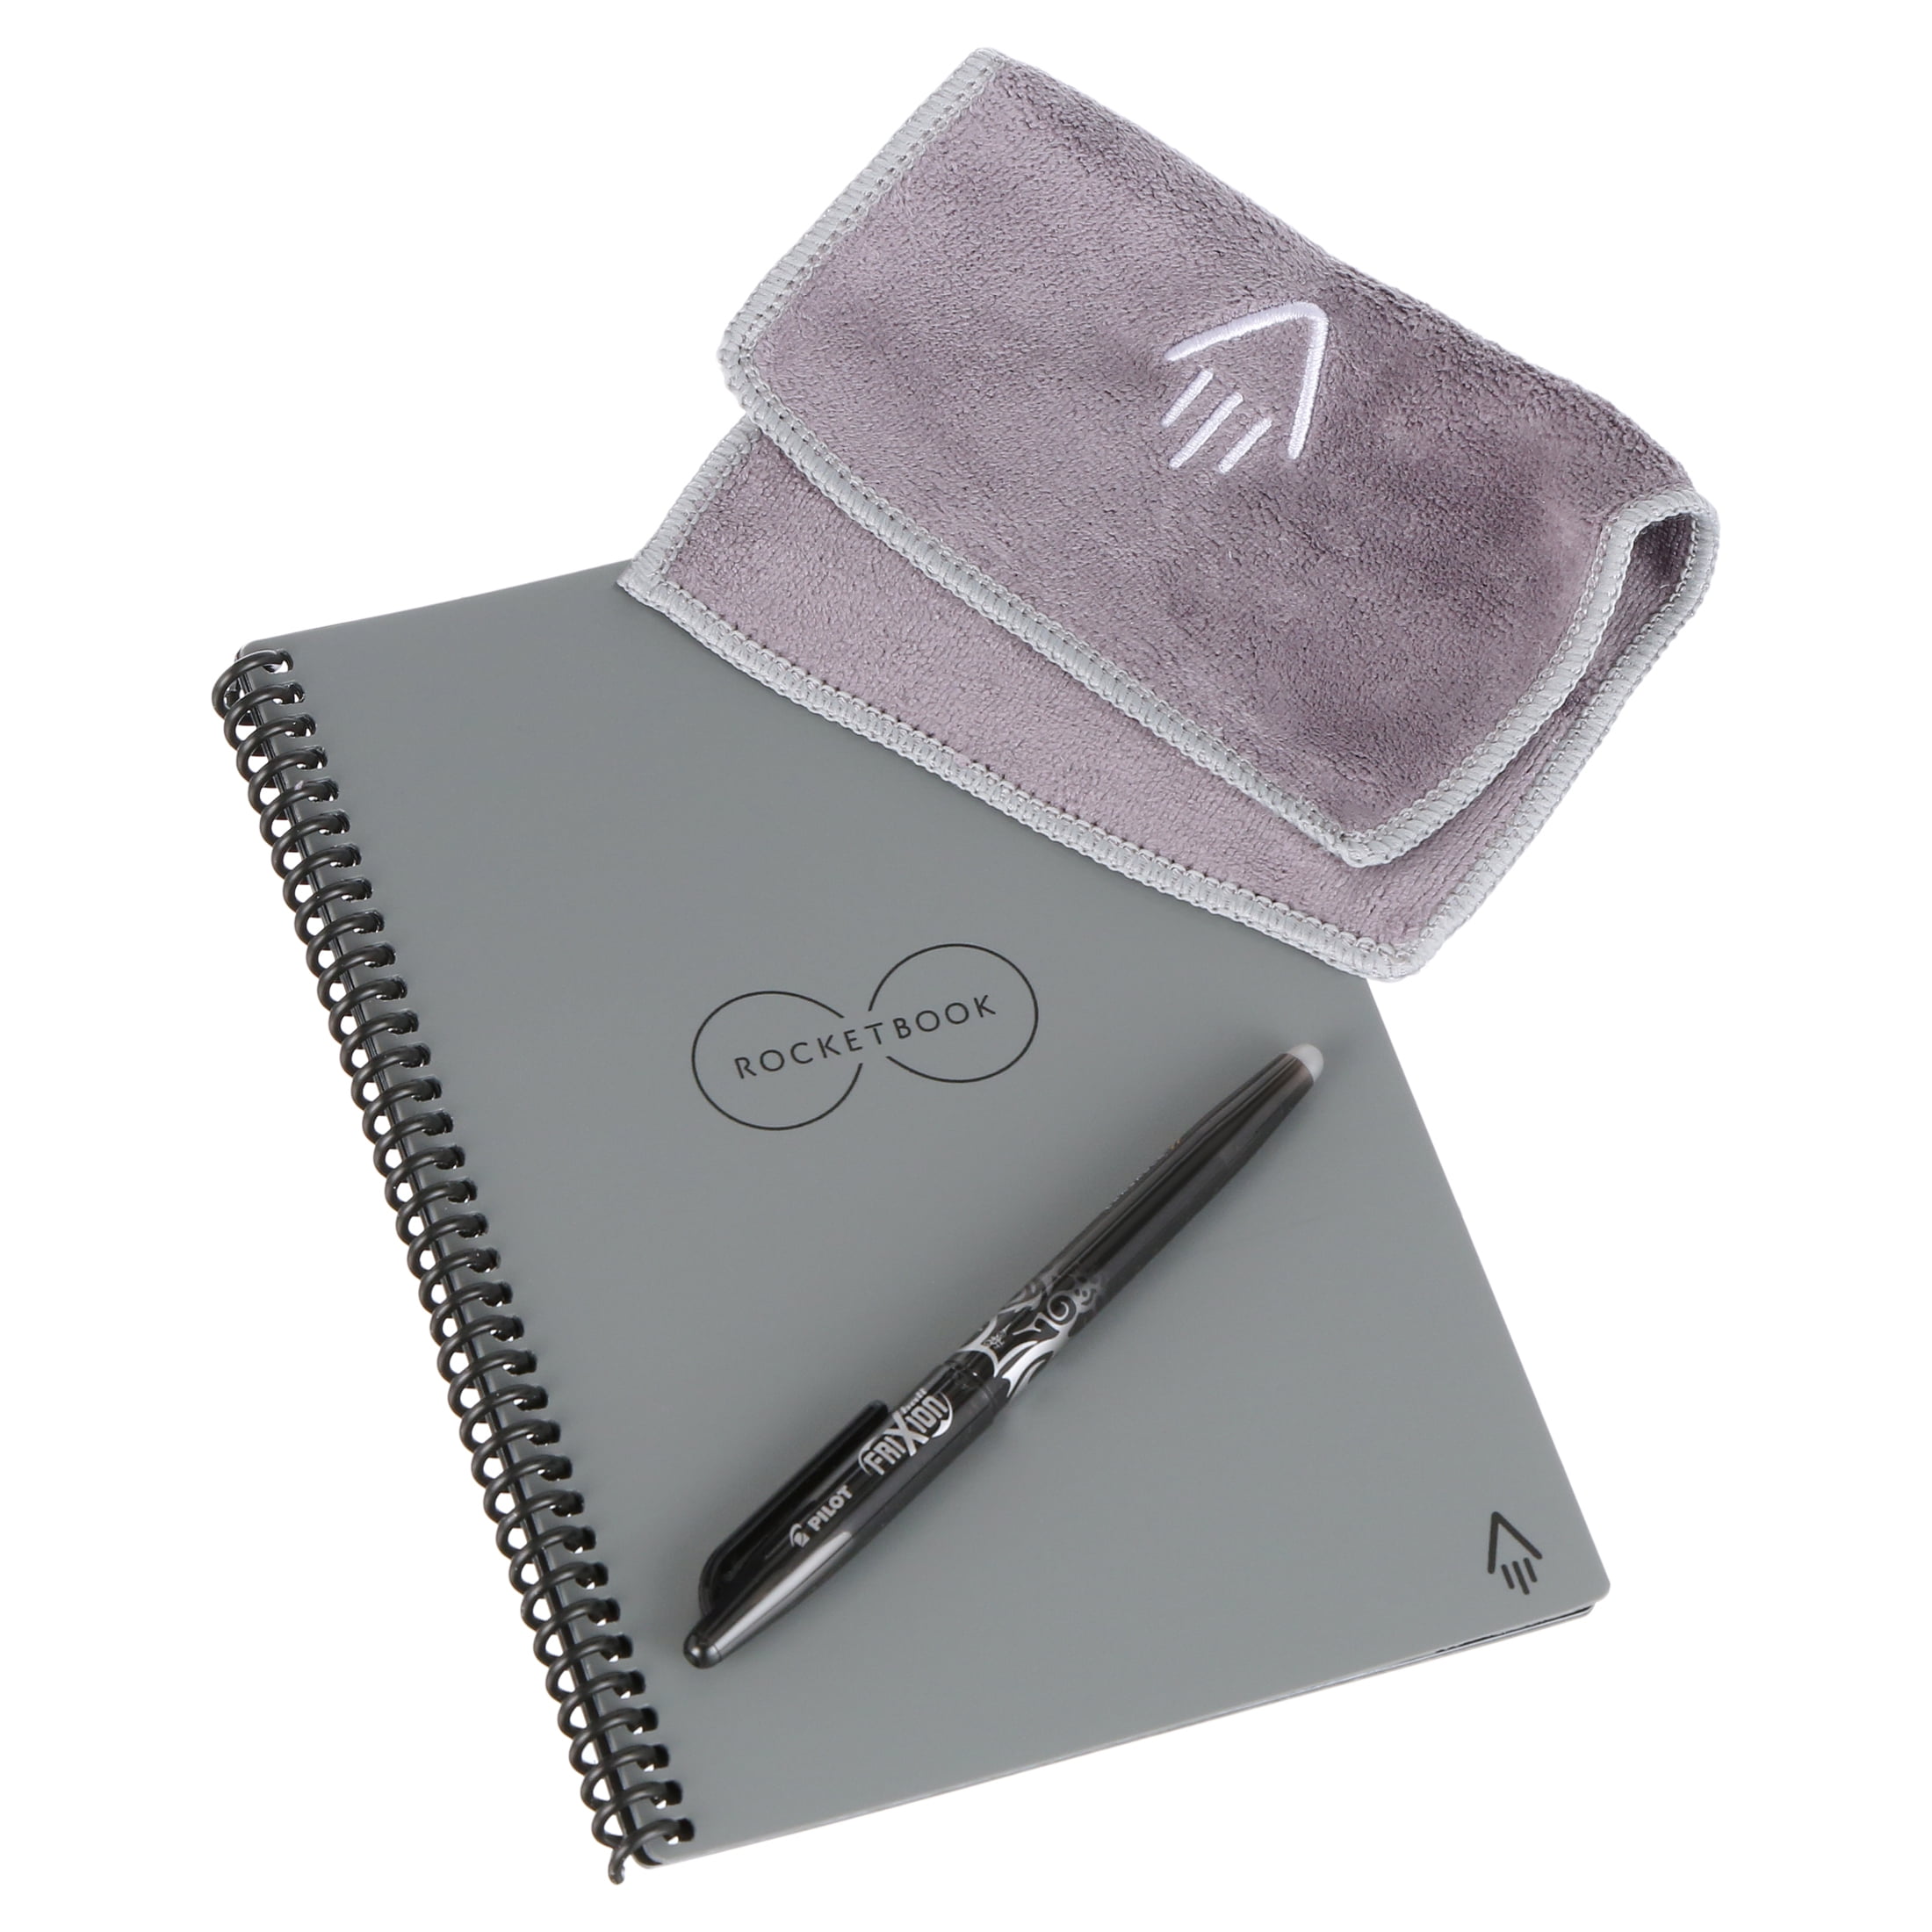  Rocketbook Smart Notebook Accessory Kit - 2 Black Capped  FriXion Pens, 1 Spray Bottle, 1 Microfiber Cloth, and 1 Pen Station  Scannable Notebook Accessories - Write, Scan, Erase, Reuse : Electronics